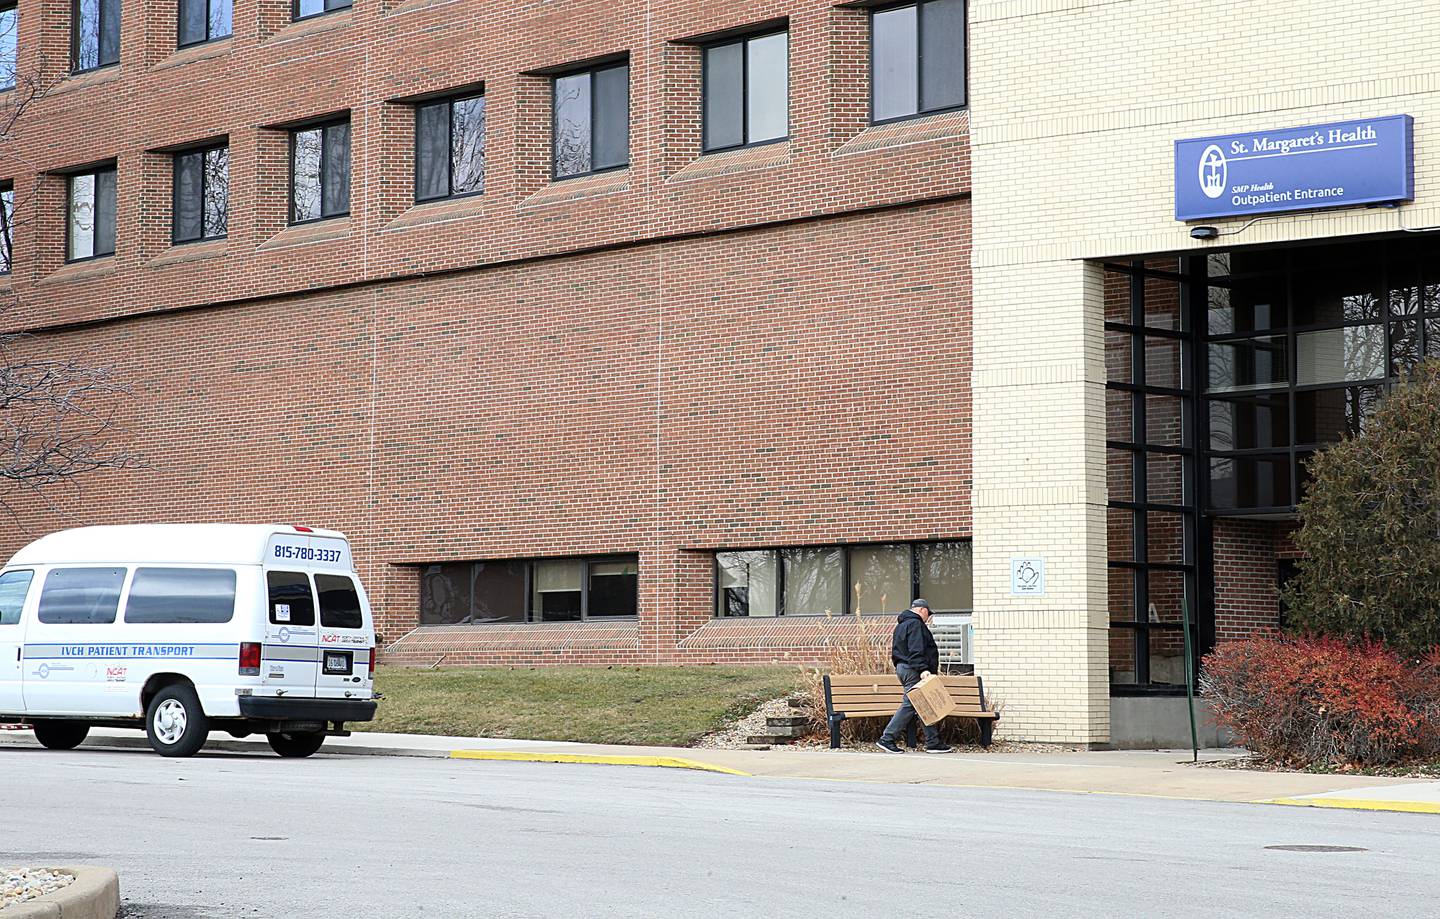 A employee delivers a box to St. Margaret's Peru Hospital on Monday, Jan. 23, 2023 in Peru. Operations at St. Margaret’s Health-Peru will be suspended at 7 a.m. Saturday, Jan. 28, and hospital officials are unsure when, or if, the Peru facility can be reopened.